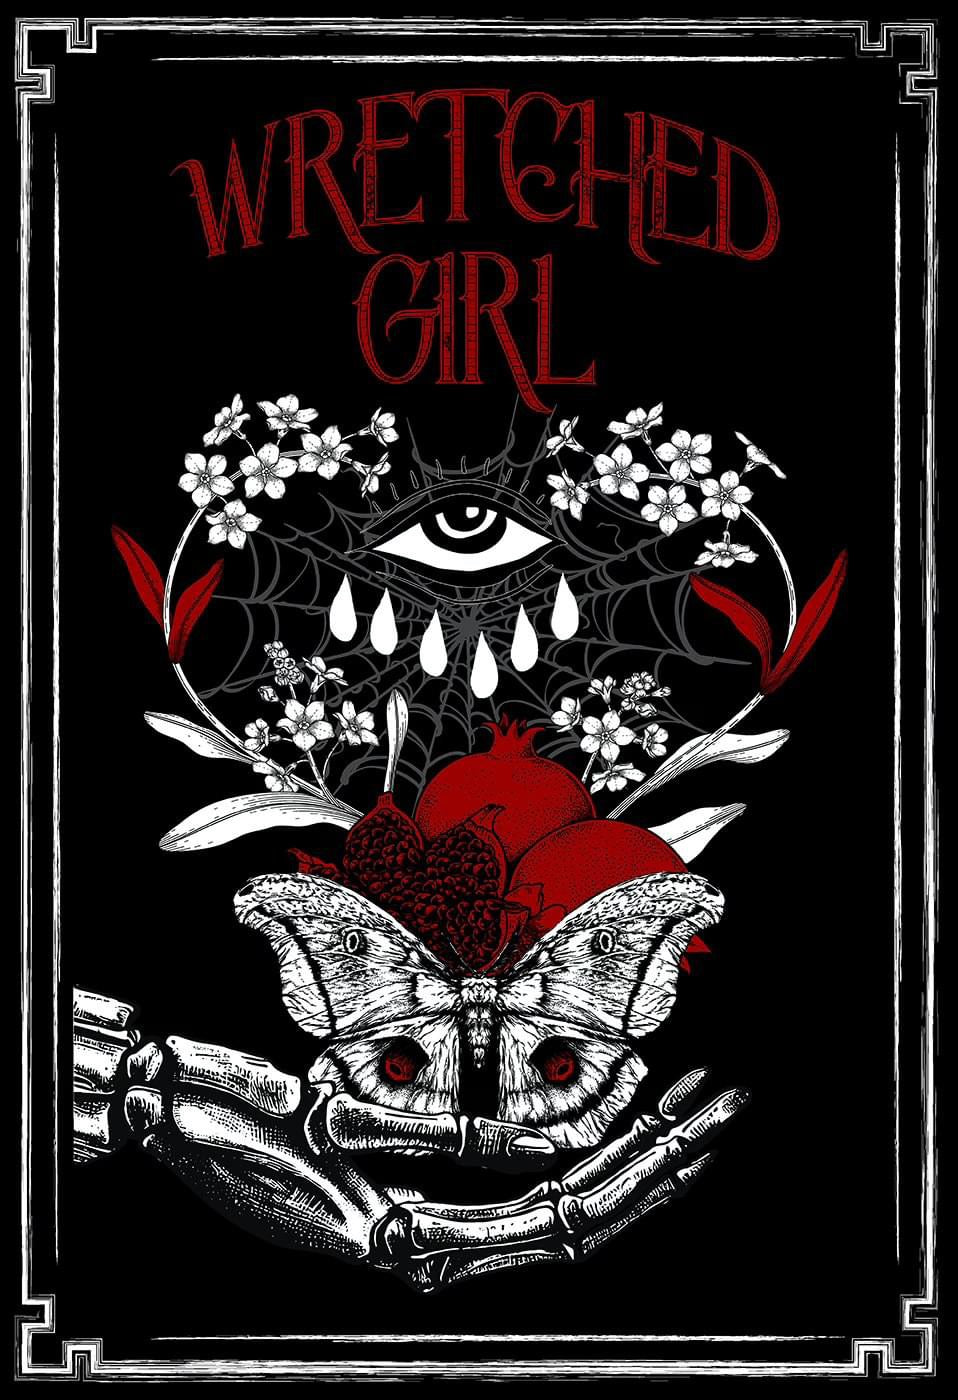 Wretched Girl